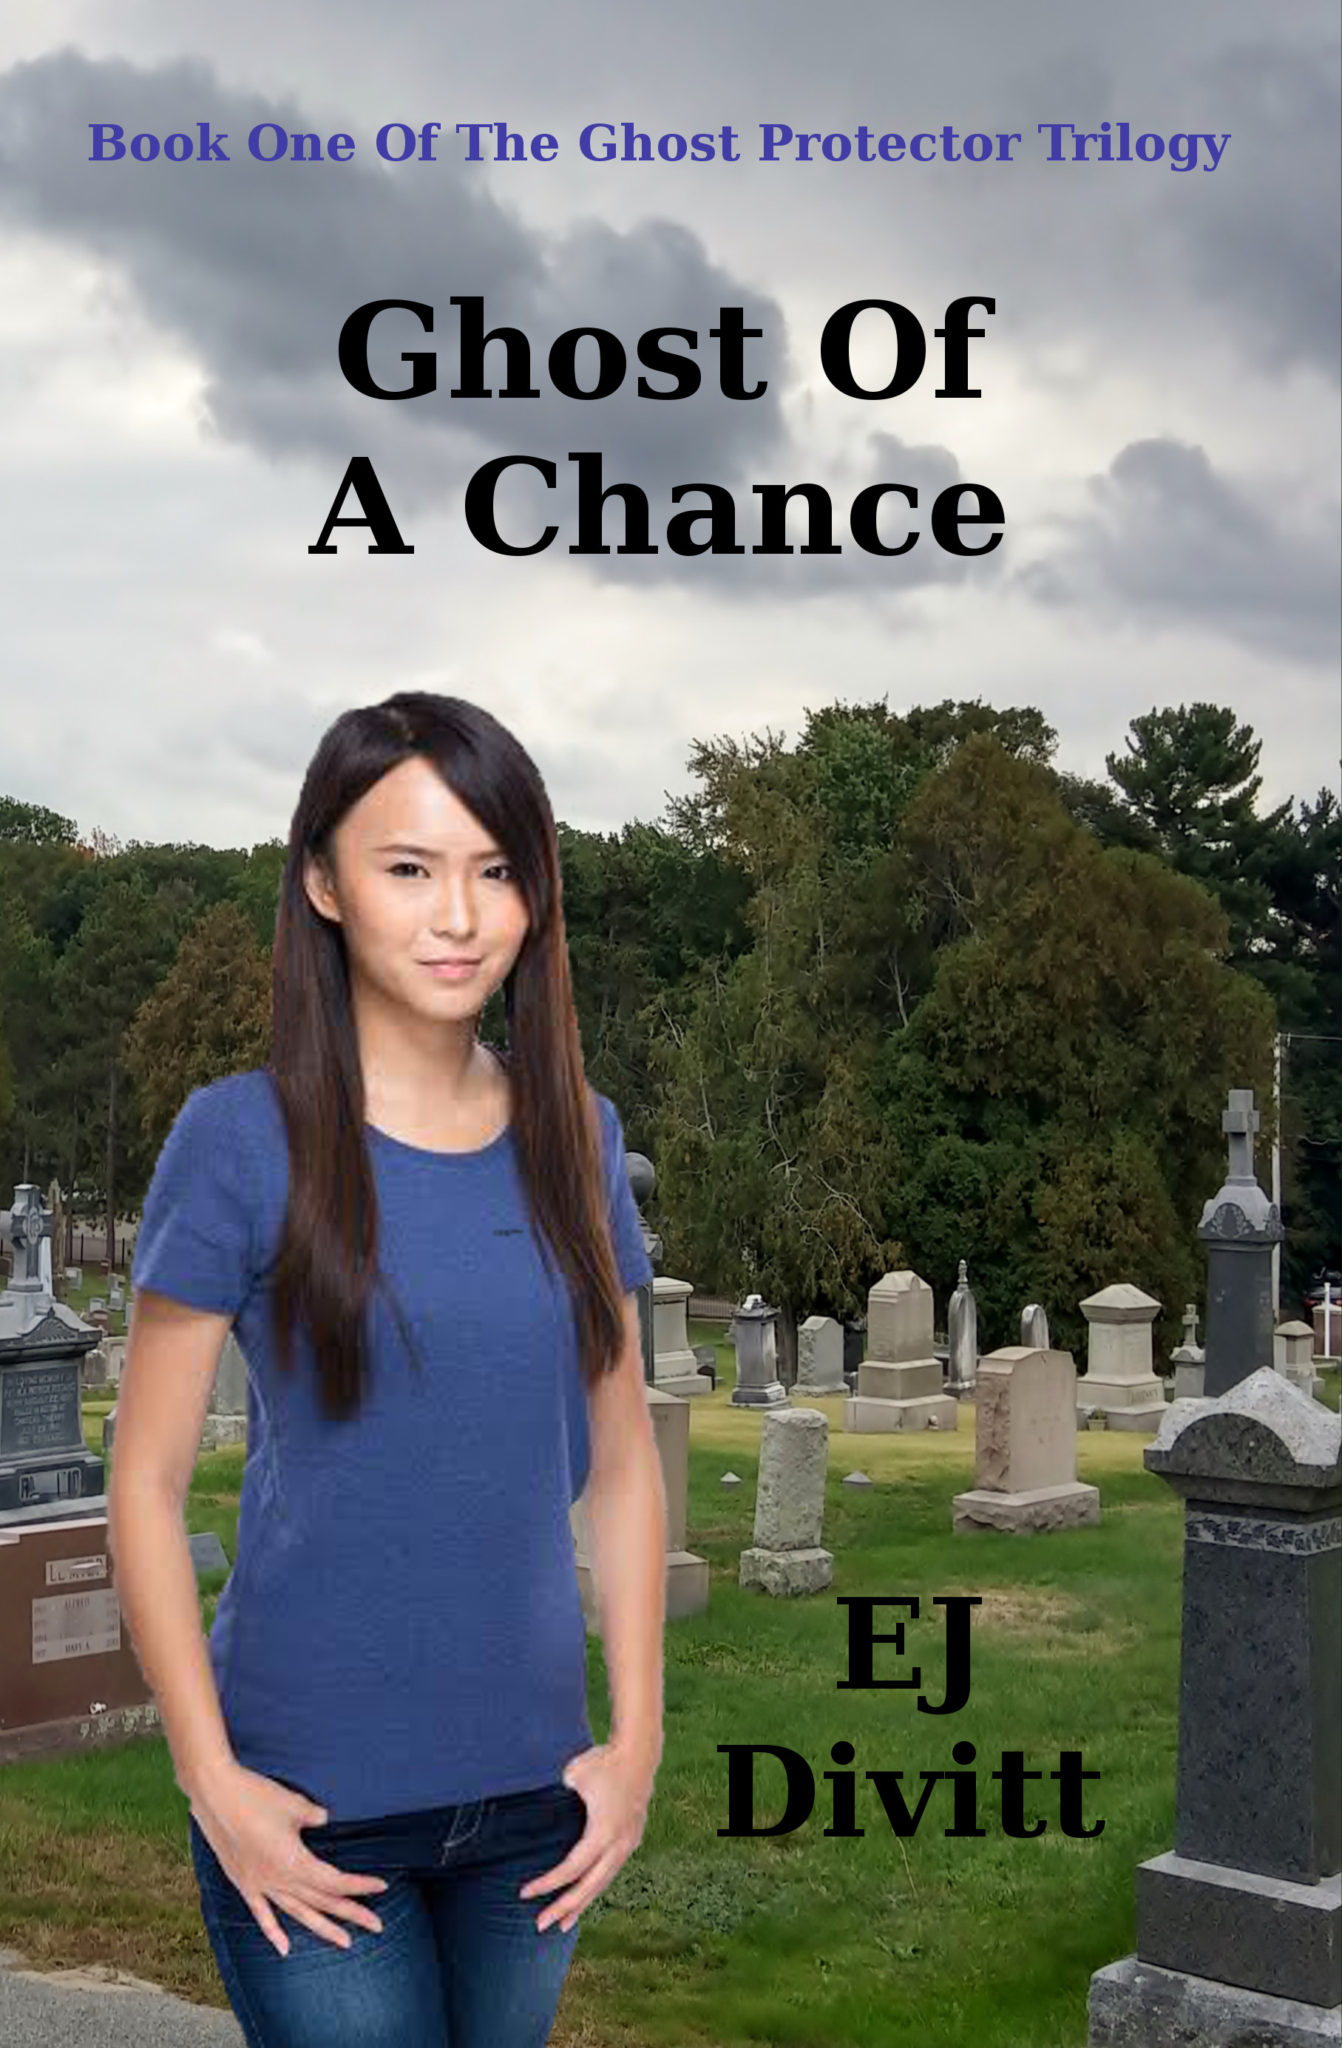 FREE: Ghost Of A Chance by EJ Divitt